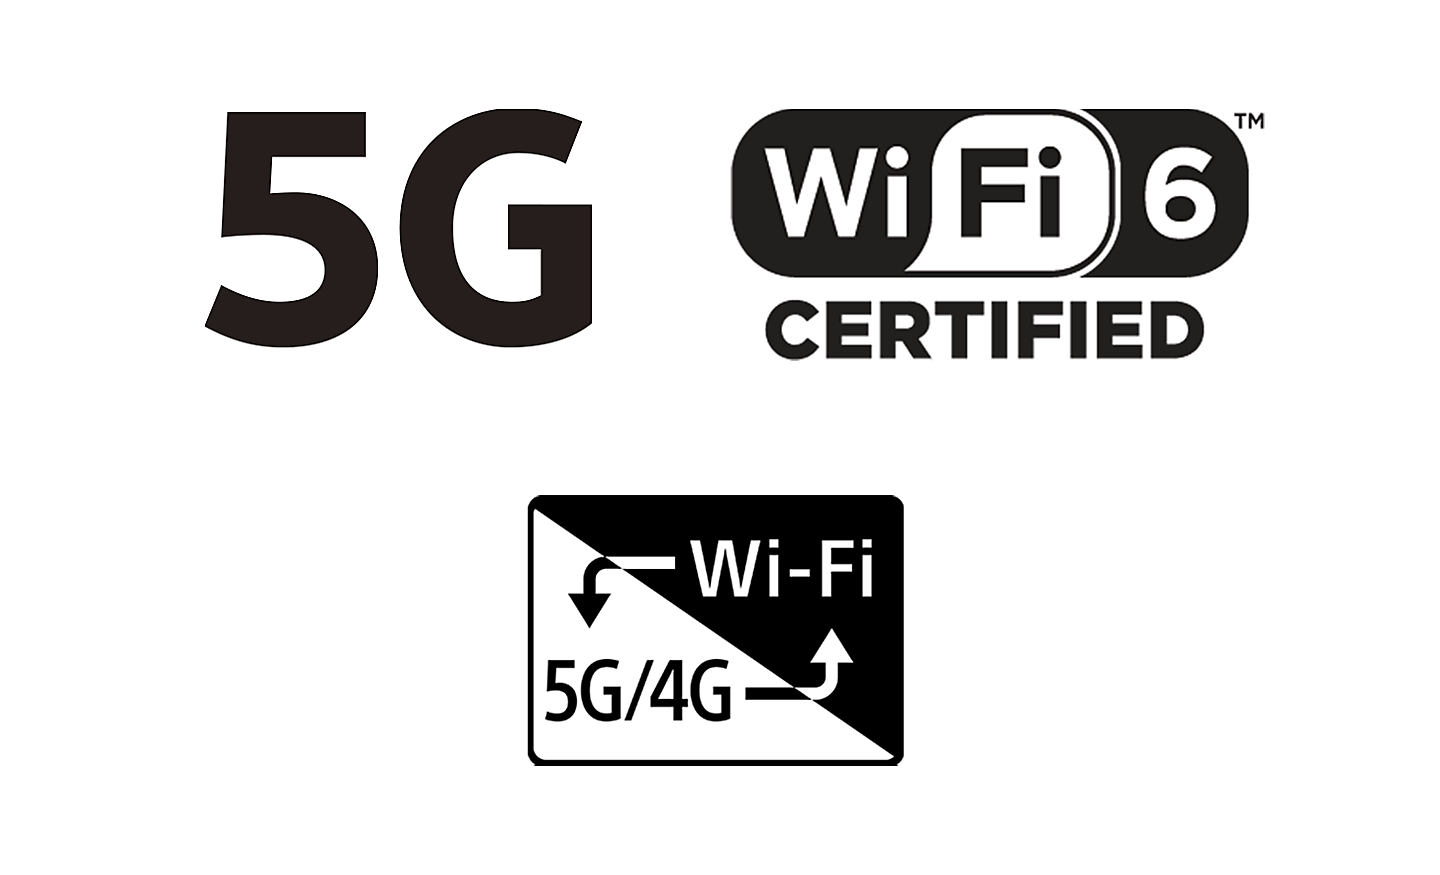 Logos for 5G, Wi-Fi 6 and Wi-Fi 5G/4G